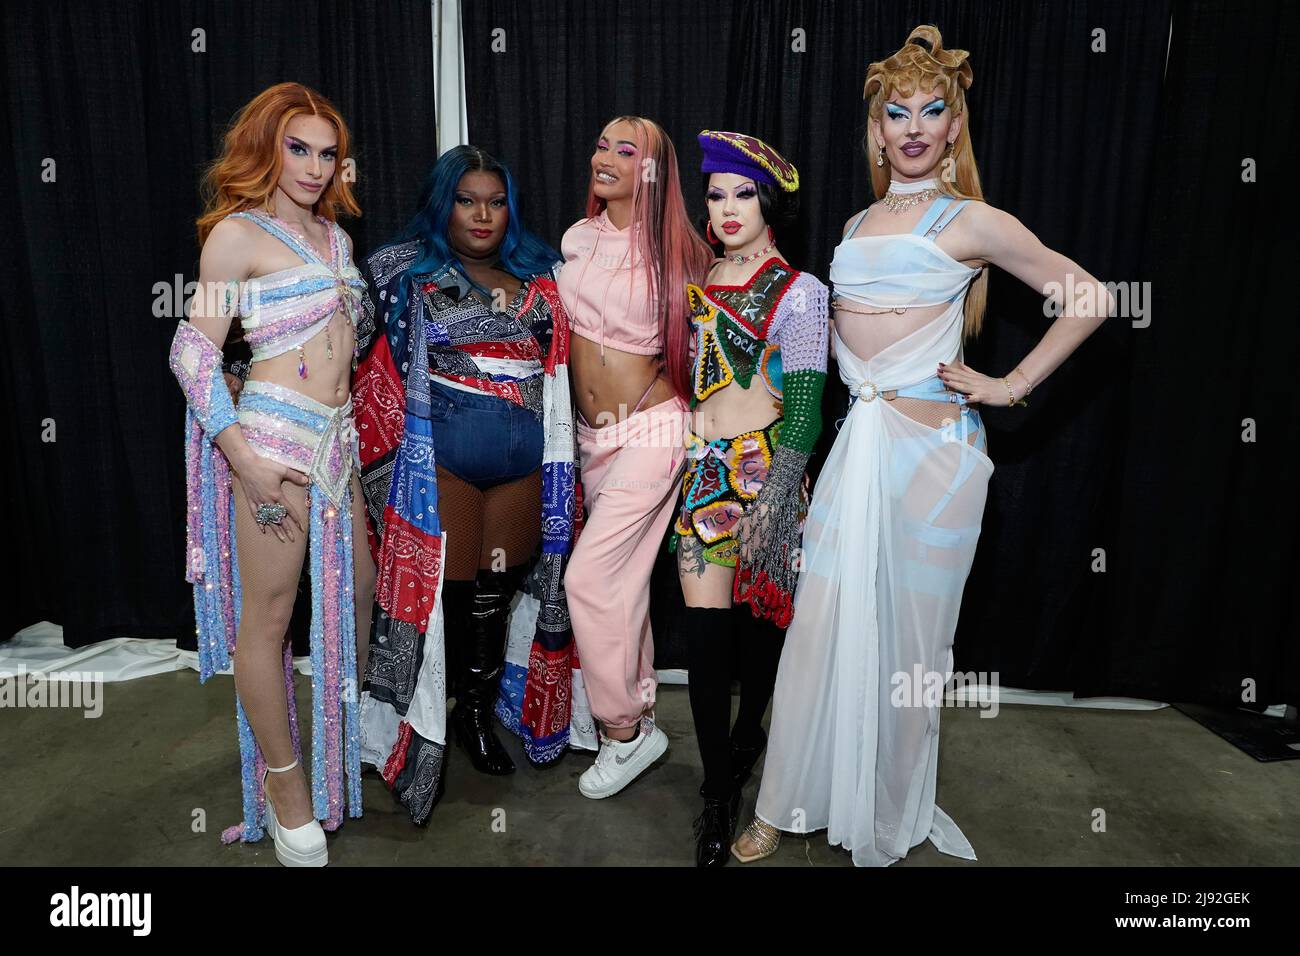 Jasmine Kennedie, Kornbread the snack Jeté, Kerri Colby, Willow Pill, Bosco during the 2022 RuPaul DragCon, Day 2, held at the LA Convention Center in Los Angeles, California, Friday, May 14, 2022.  Photo by Jennifer Graylock-Graylock.com Stock Photo